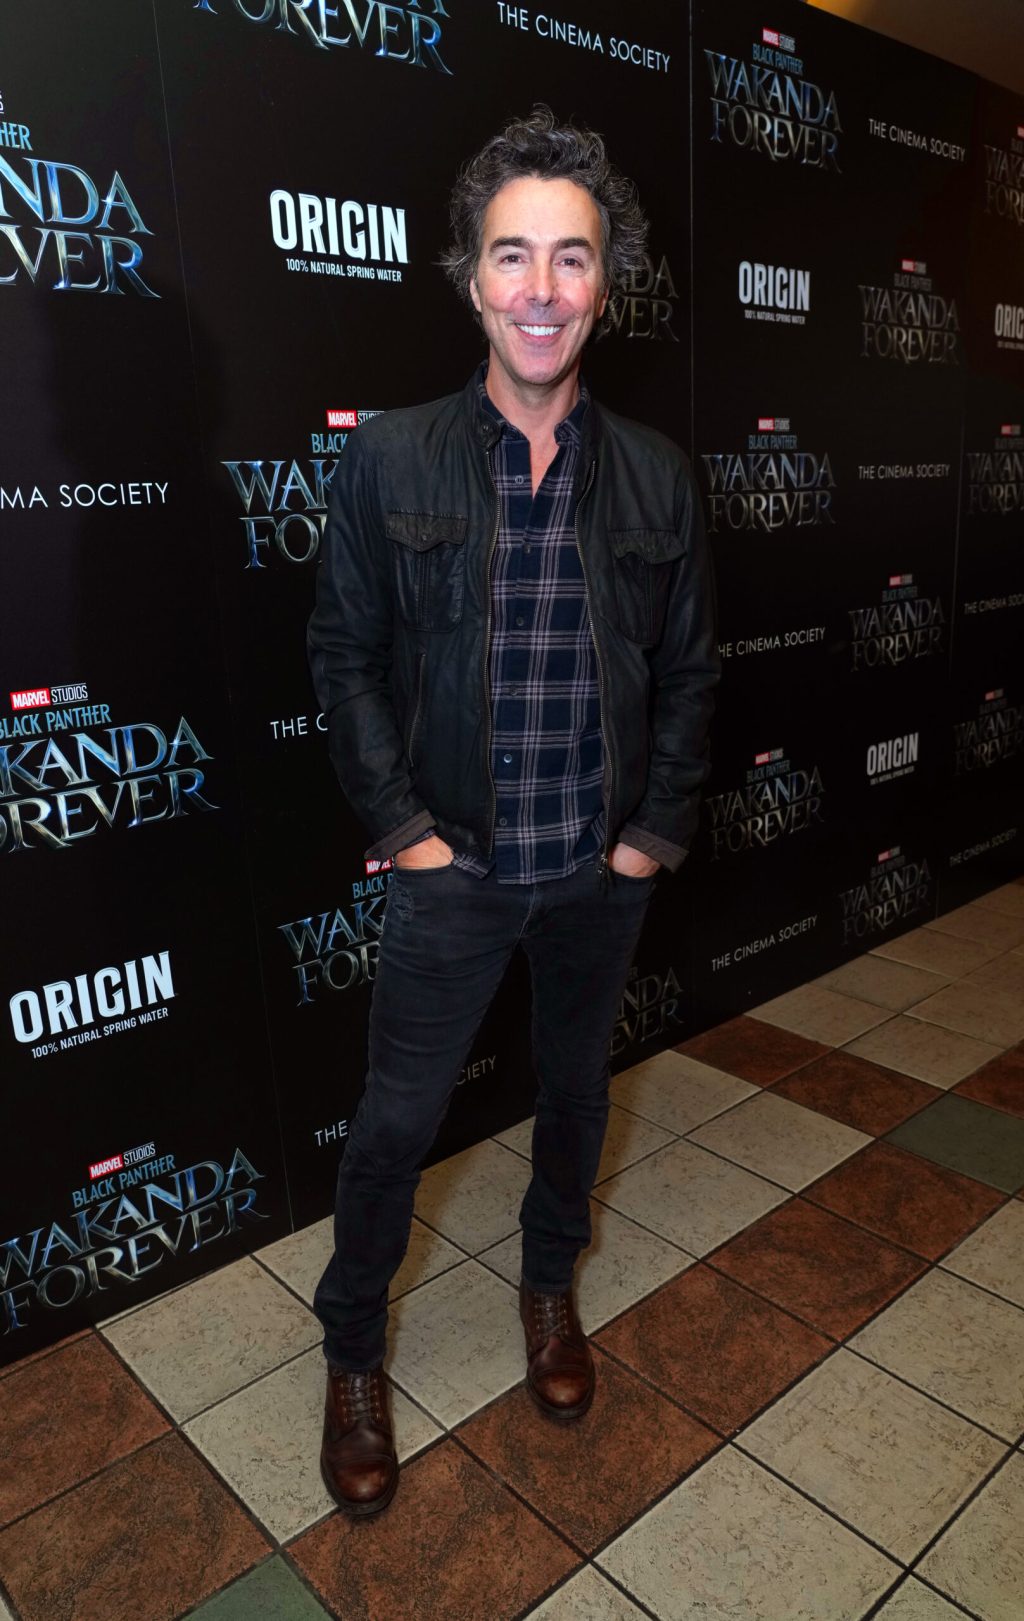 NEW YORK, NEW YORK - NOVEMBER 01: Shawn Levy attends the Black Panther: Wakanda Forever NY Red Carpet Screening at the AMC 34th St. on November 01, 2022 in New York City. (Photo by Kevin Mazur/Getty Images for Disney)